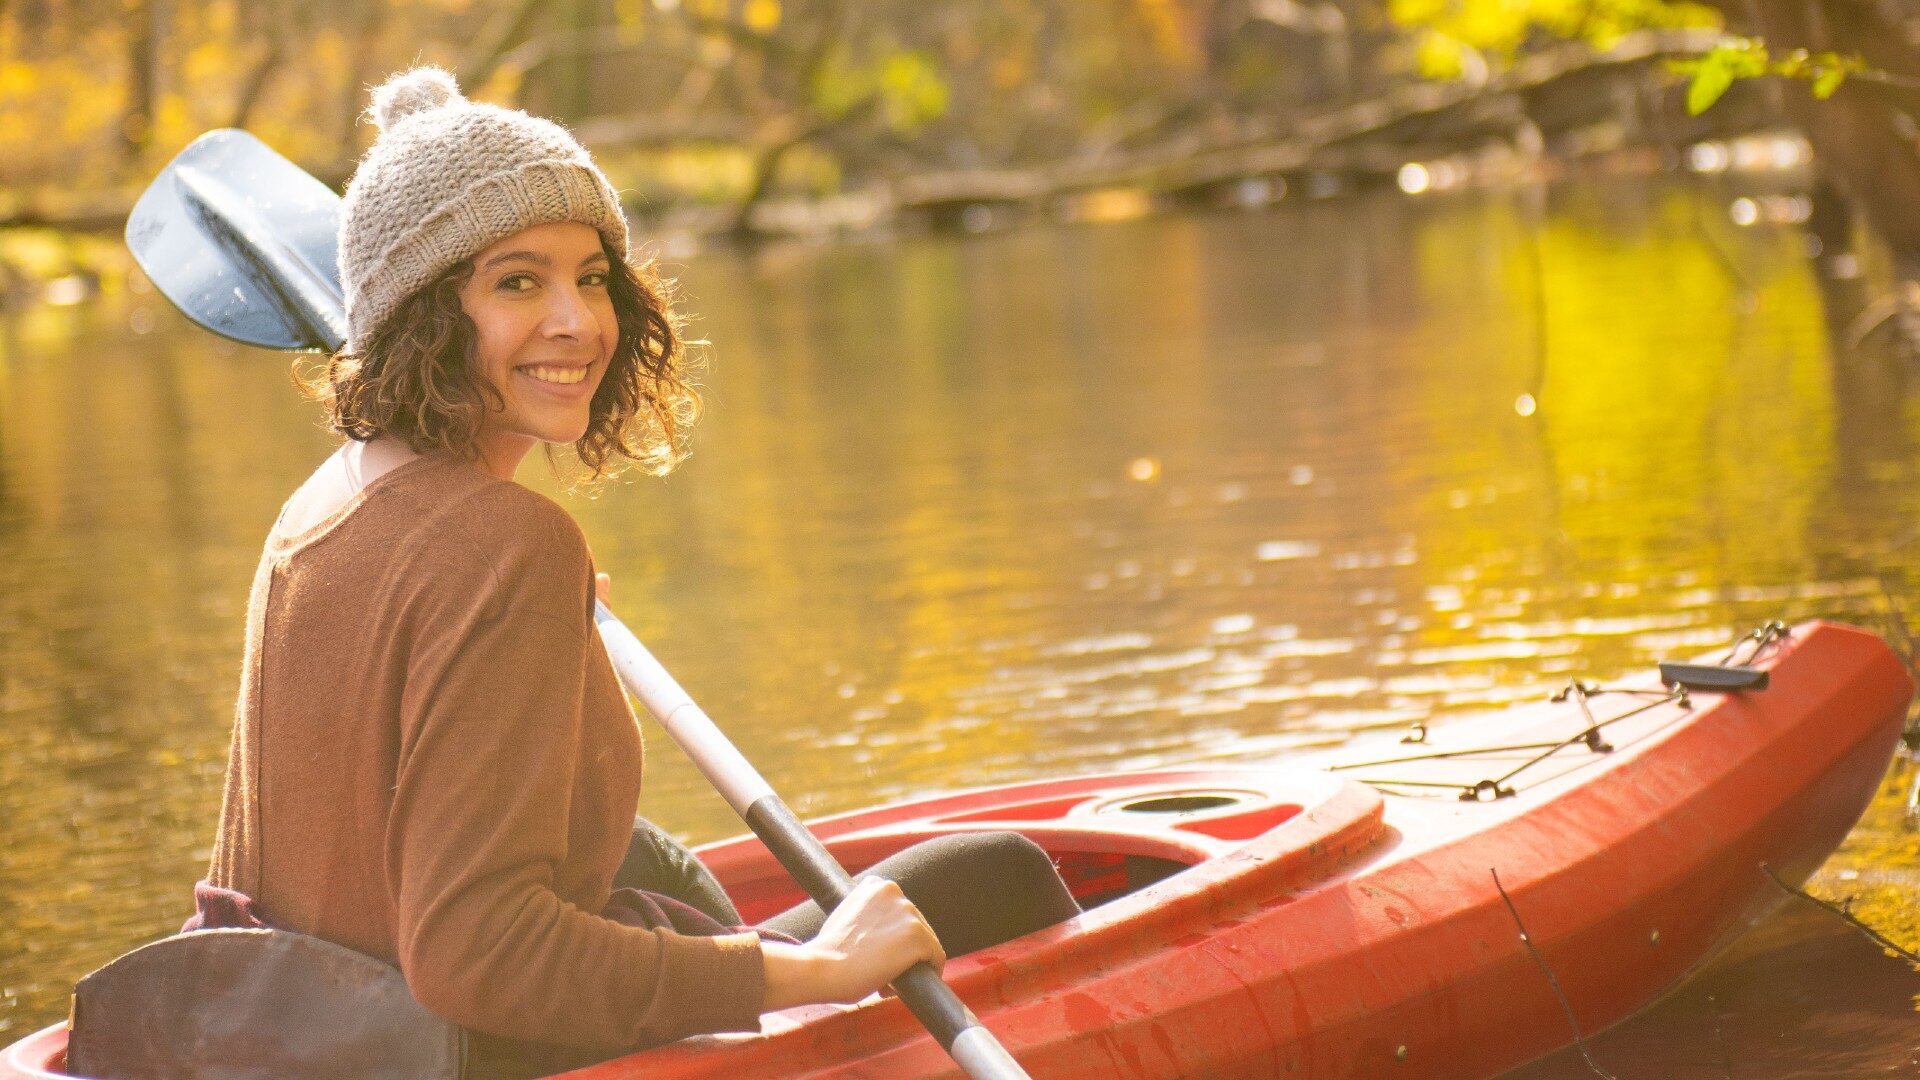 A girl in a snow hat kayaking in a red kayak down a creek bathed in sunlight